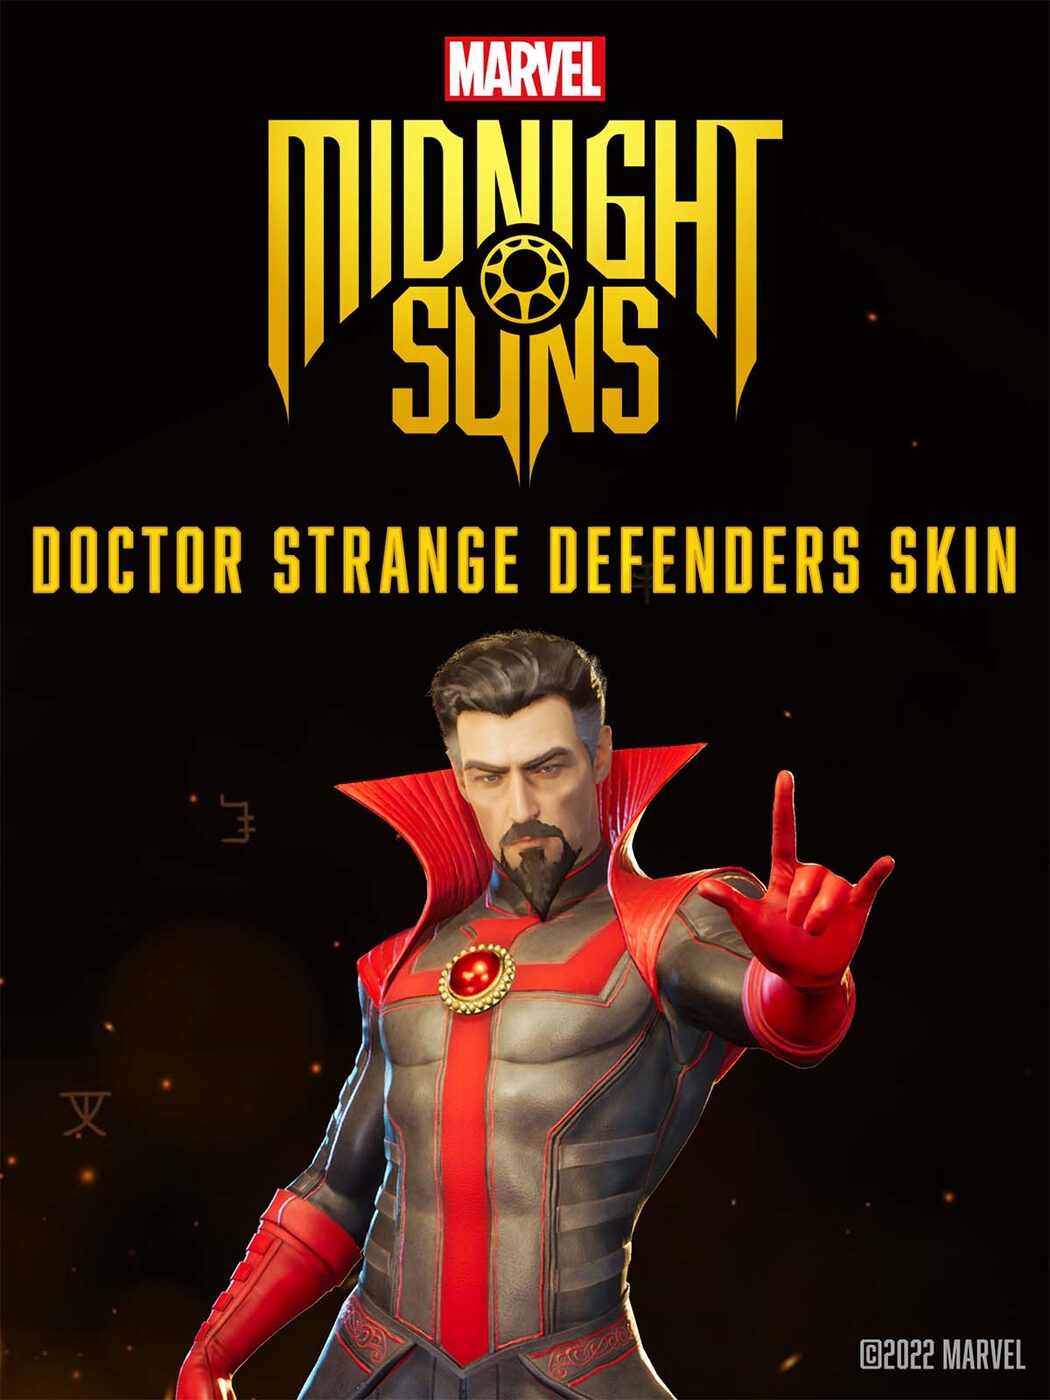 Midnight Suns 2 Playable Characters : r/midnightsuns